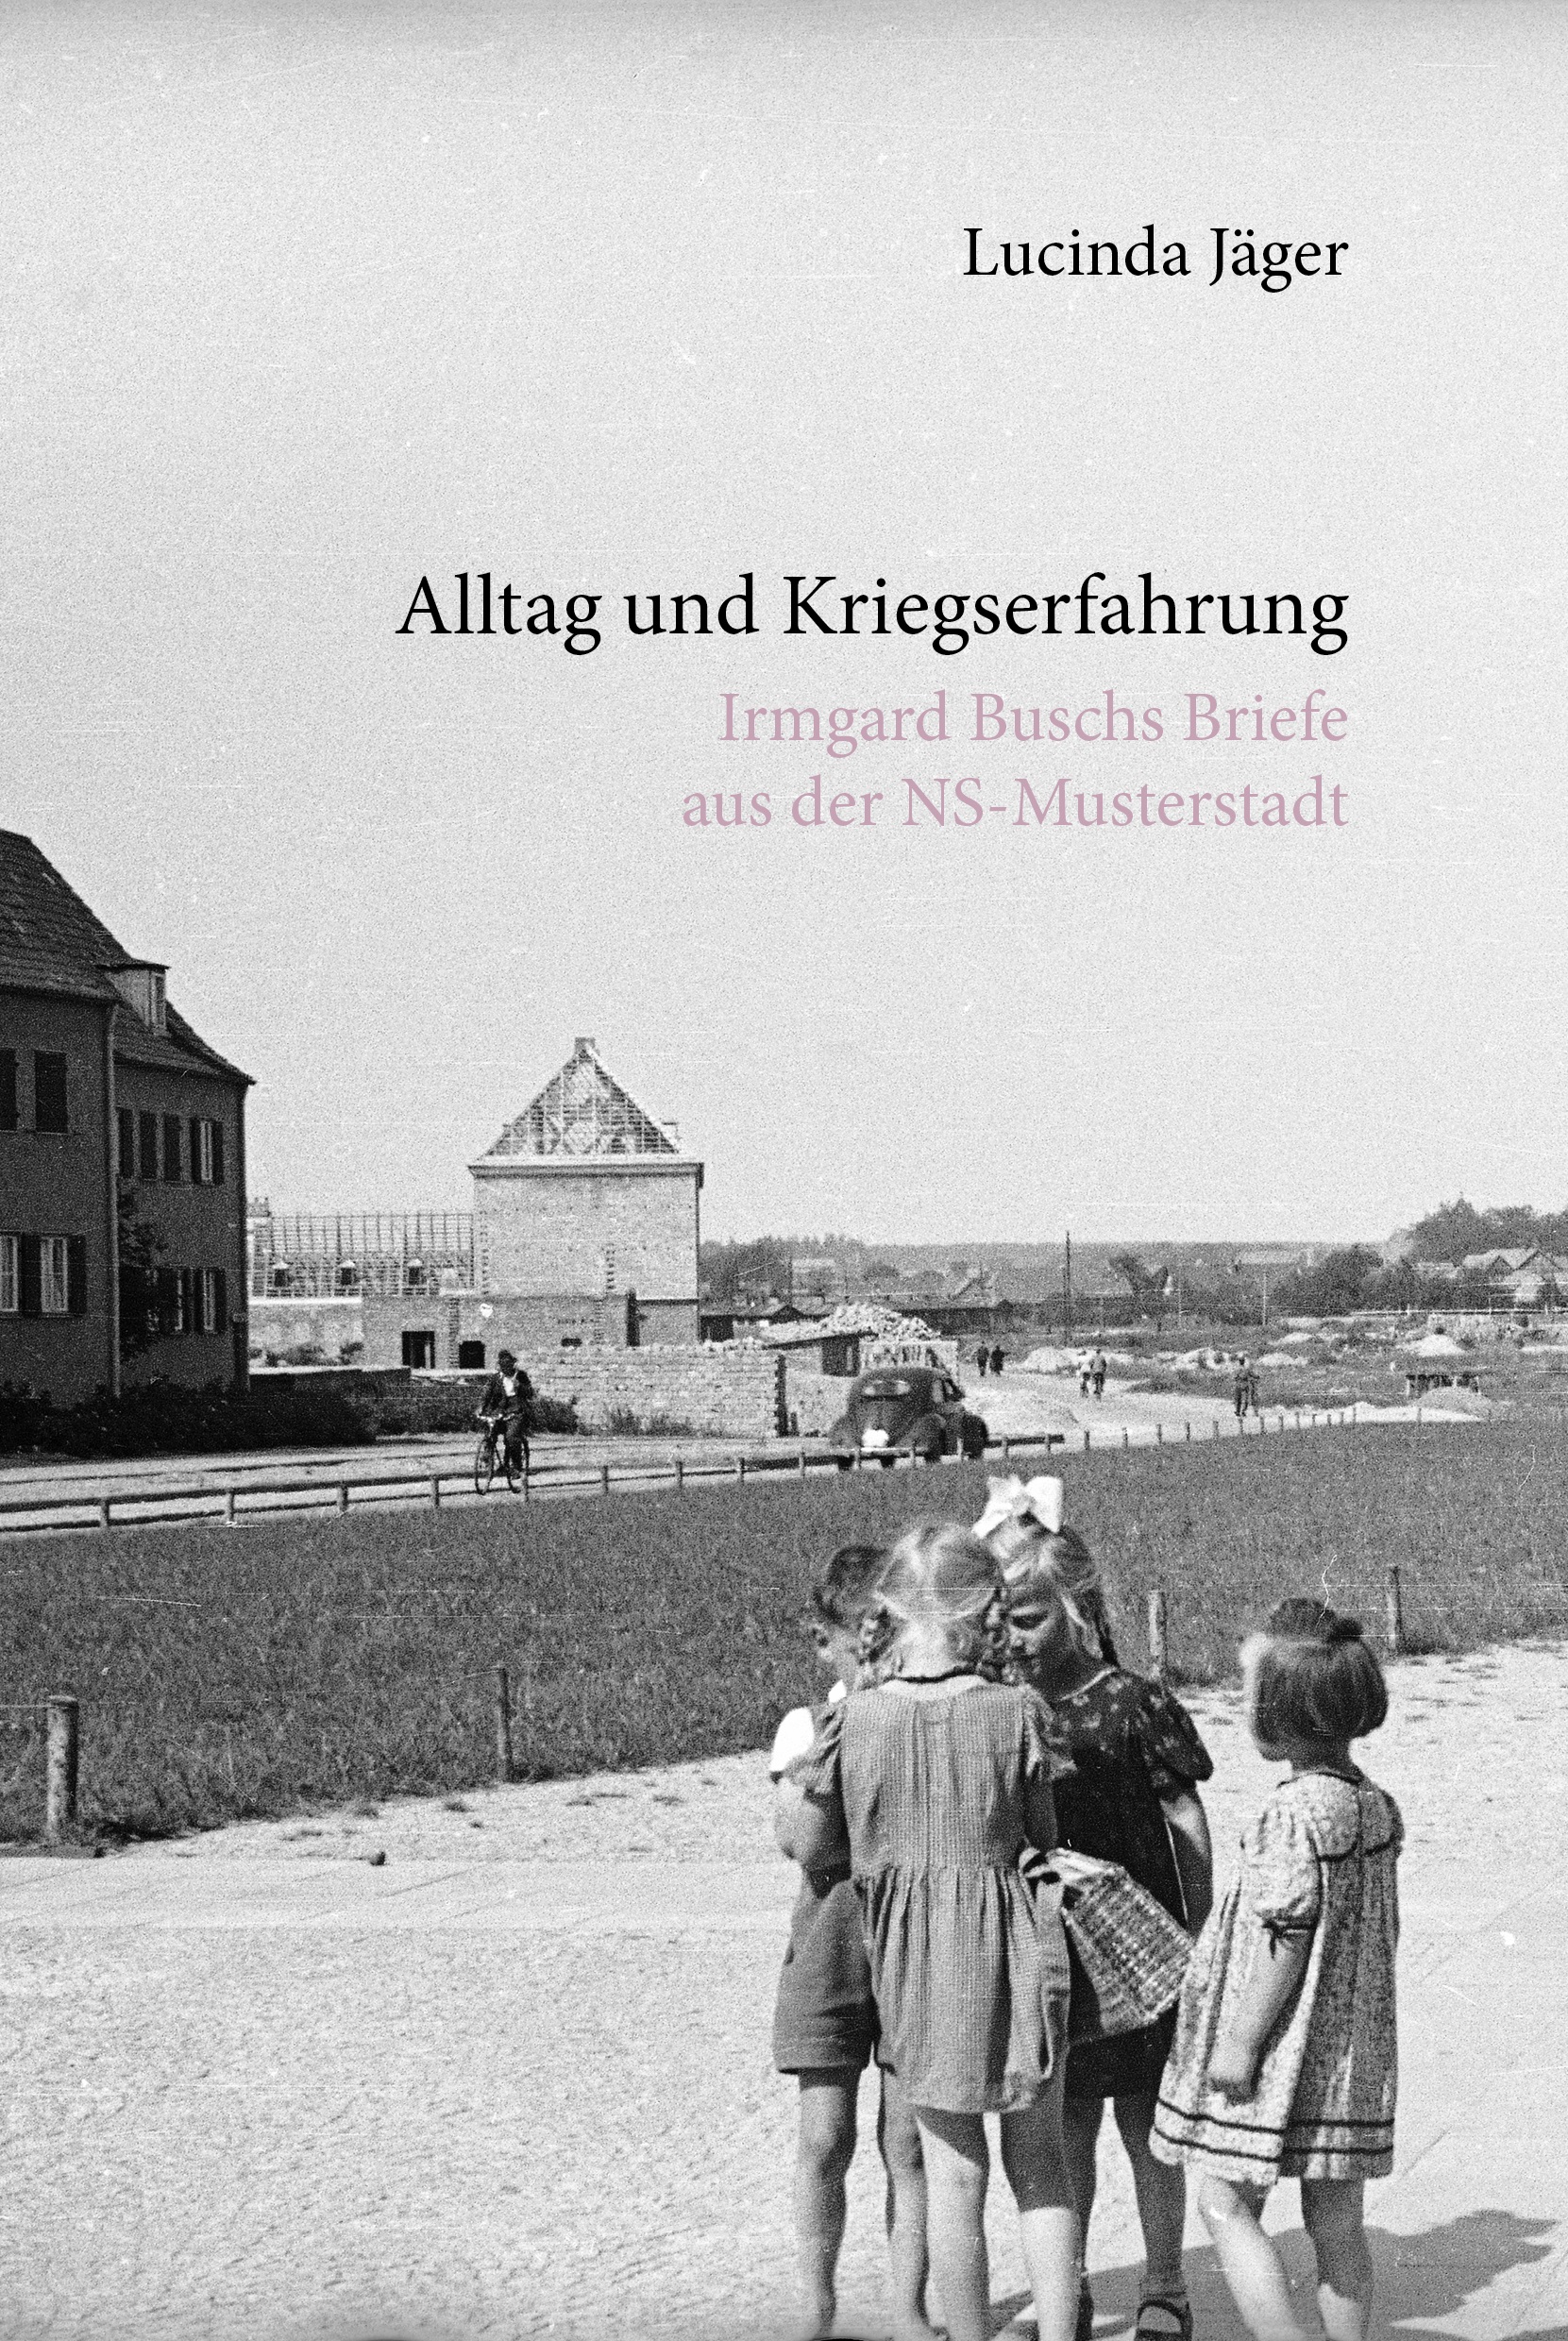 Title page of the book "Everyday life and war experience - Irmgard Busch's letters from the Nazi model town"